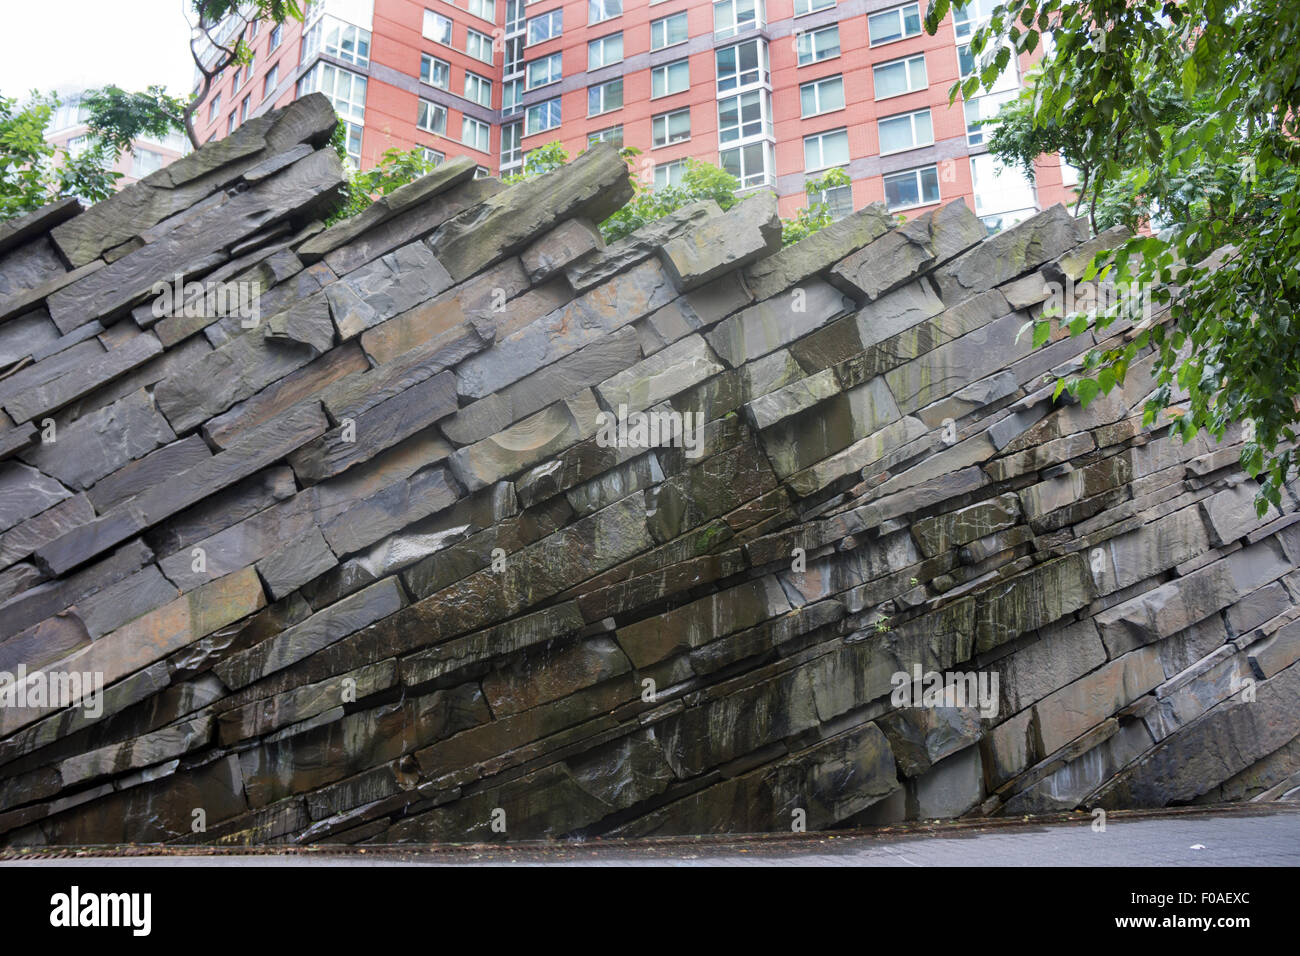 A stone wall in Teardrop Park, Battery Park City, Manhattan. The 1.8 acre park was designed by Michael Van Valkenburgh. Stock Photo